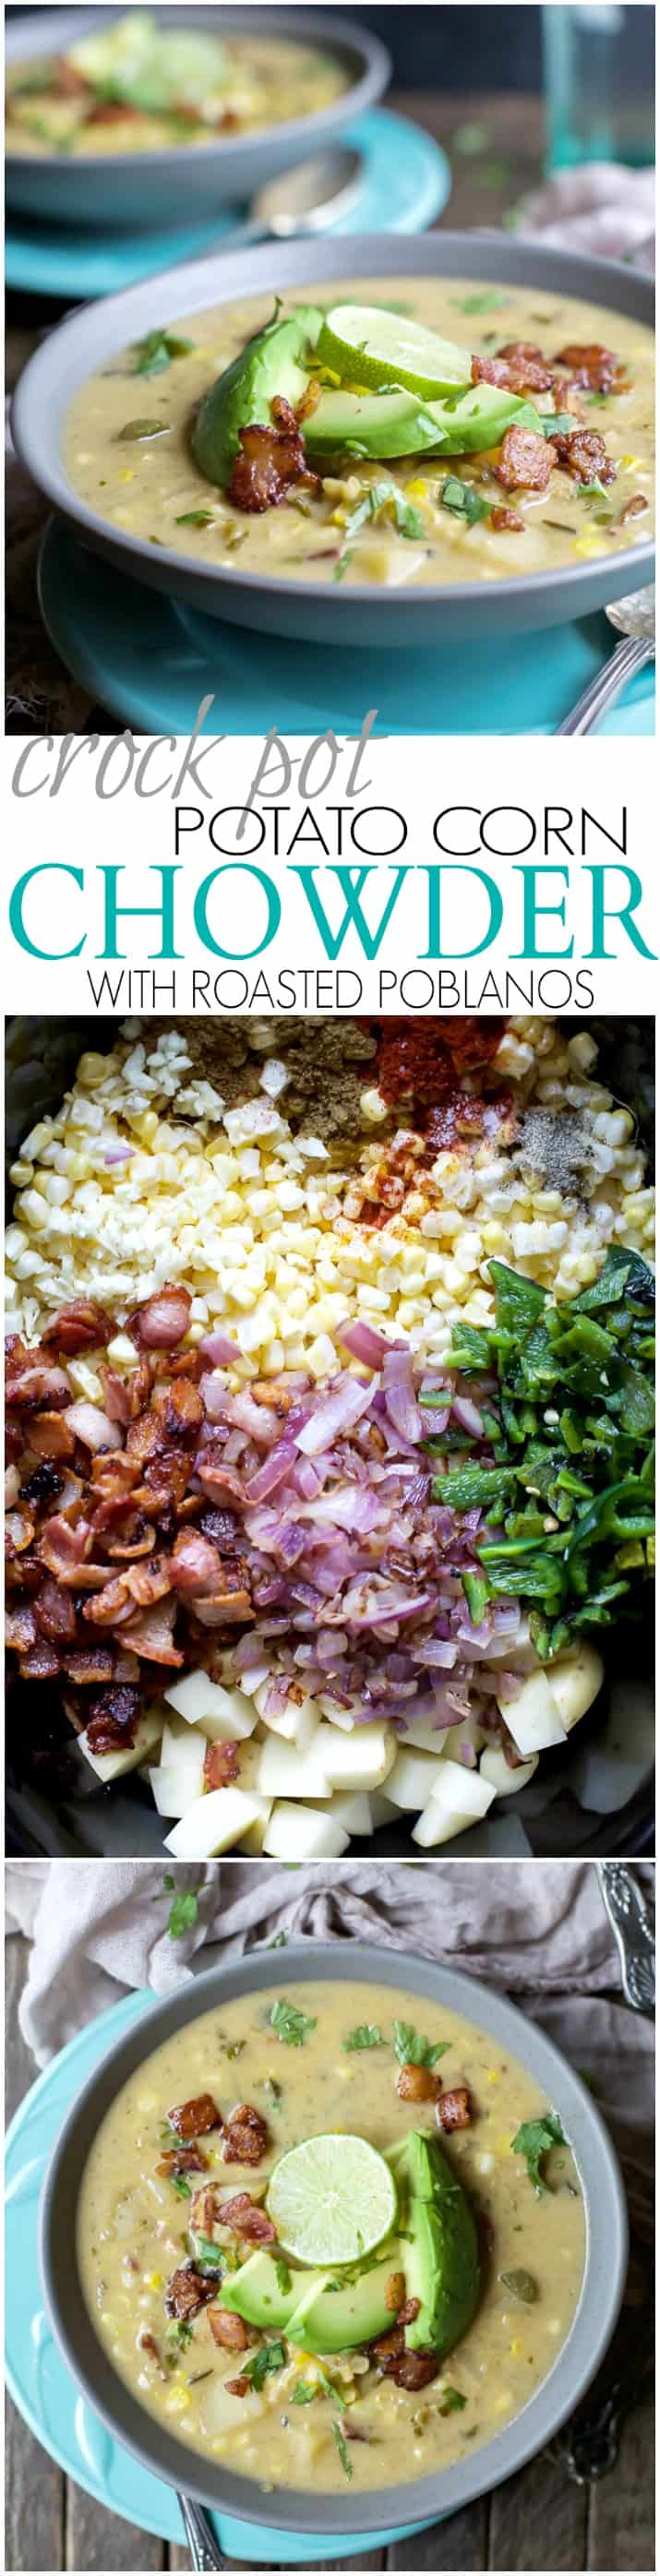 Collage for Crock Pot Potato Corn Chowder with Roasted Poblanos recipe